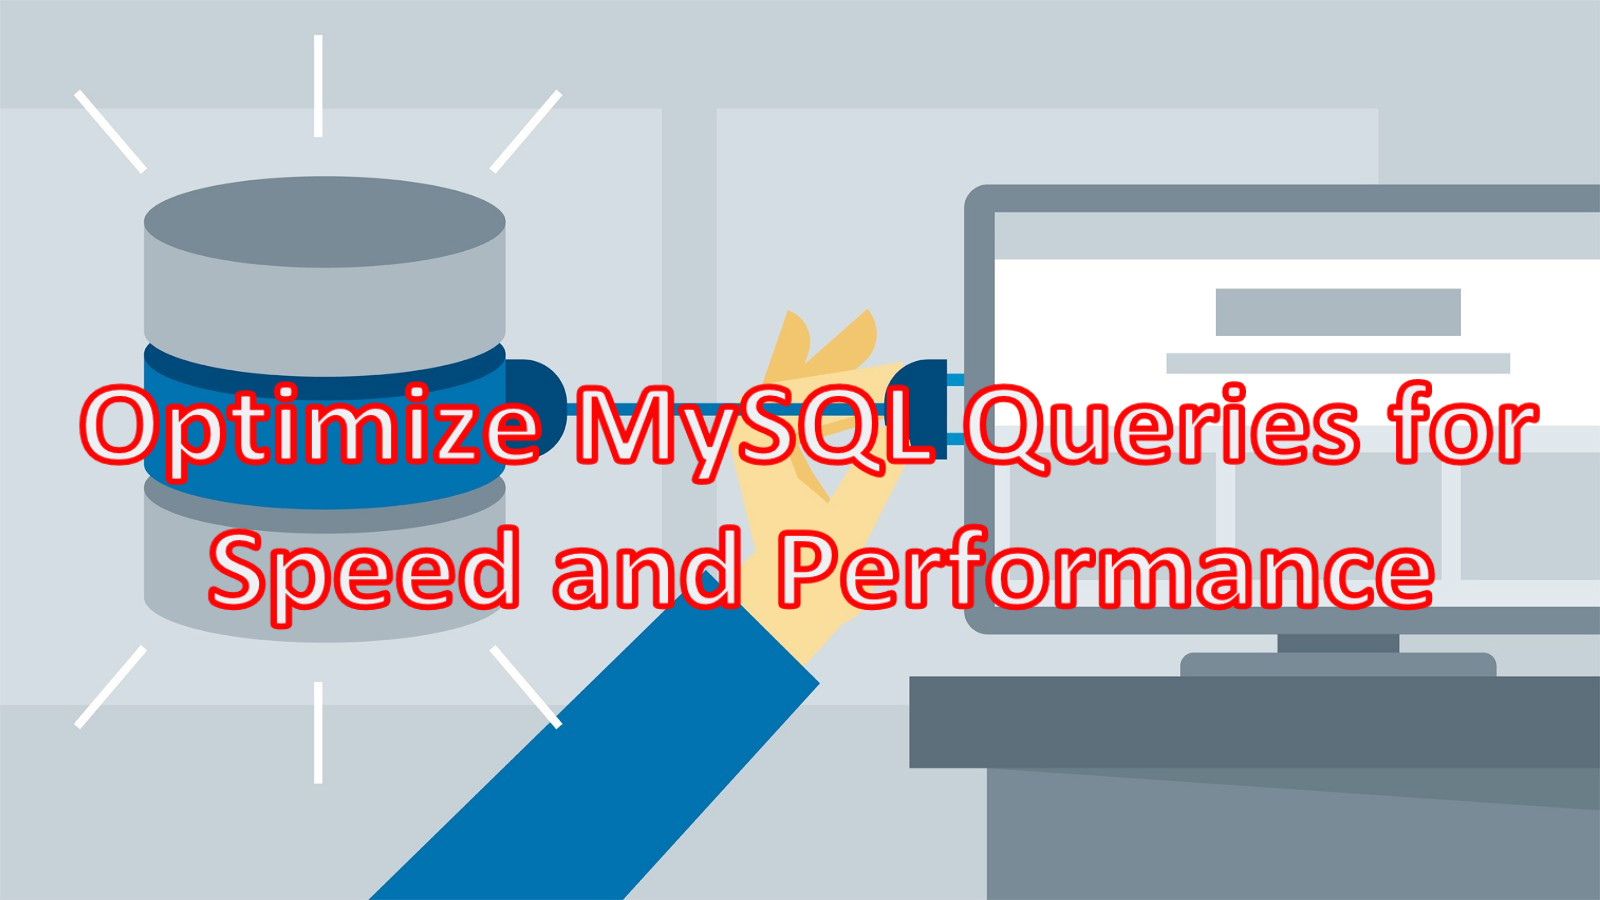 Optimize MySQL Queries for Speed and Performance